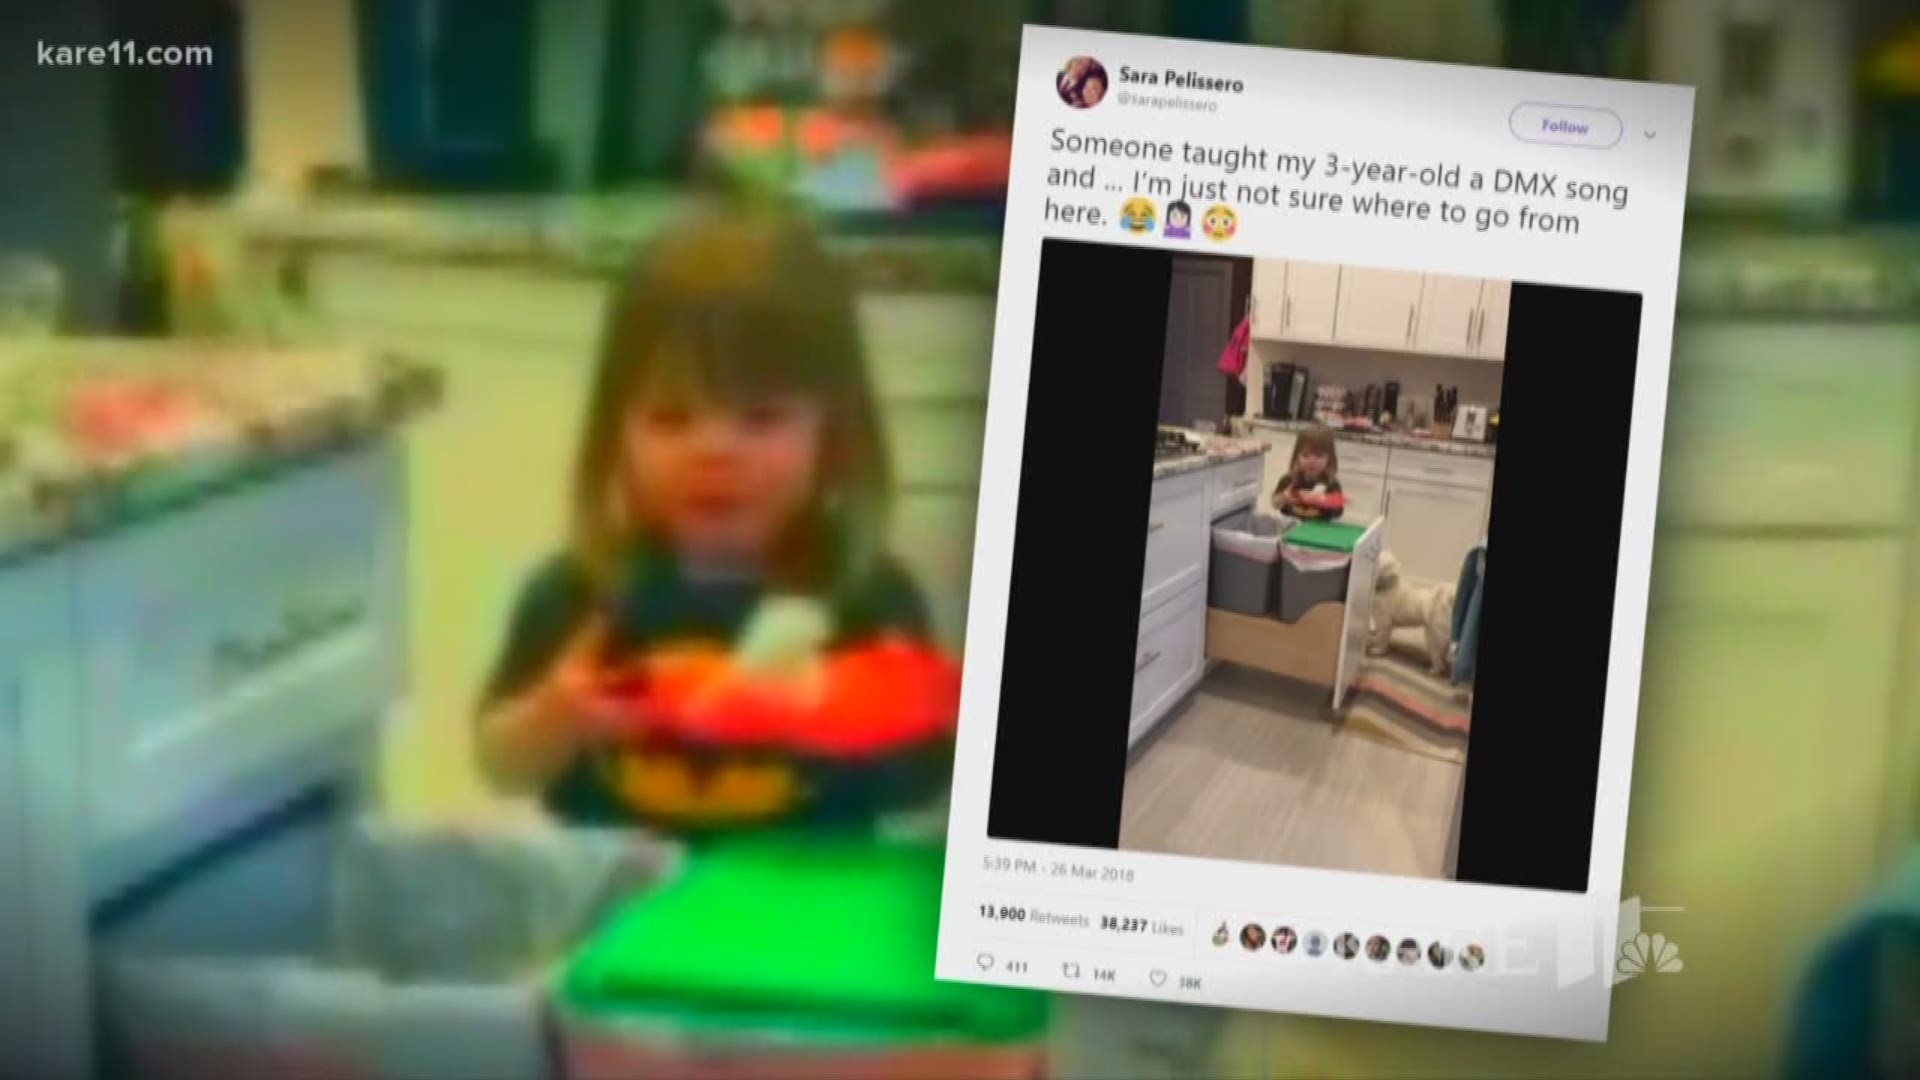 Our web producer Sara Pelissero posted this video of her 3-year-old daughter, Tegan, singing along to the DMX song "Party Up." Now it's been watched almost 2 million times... and counting.